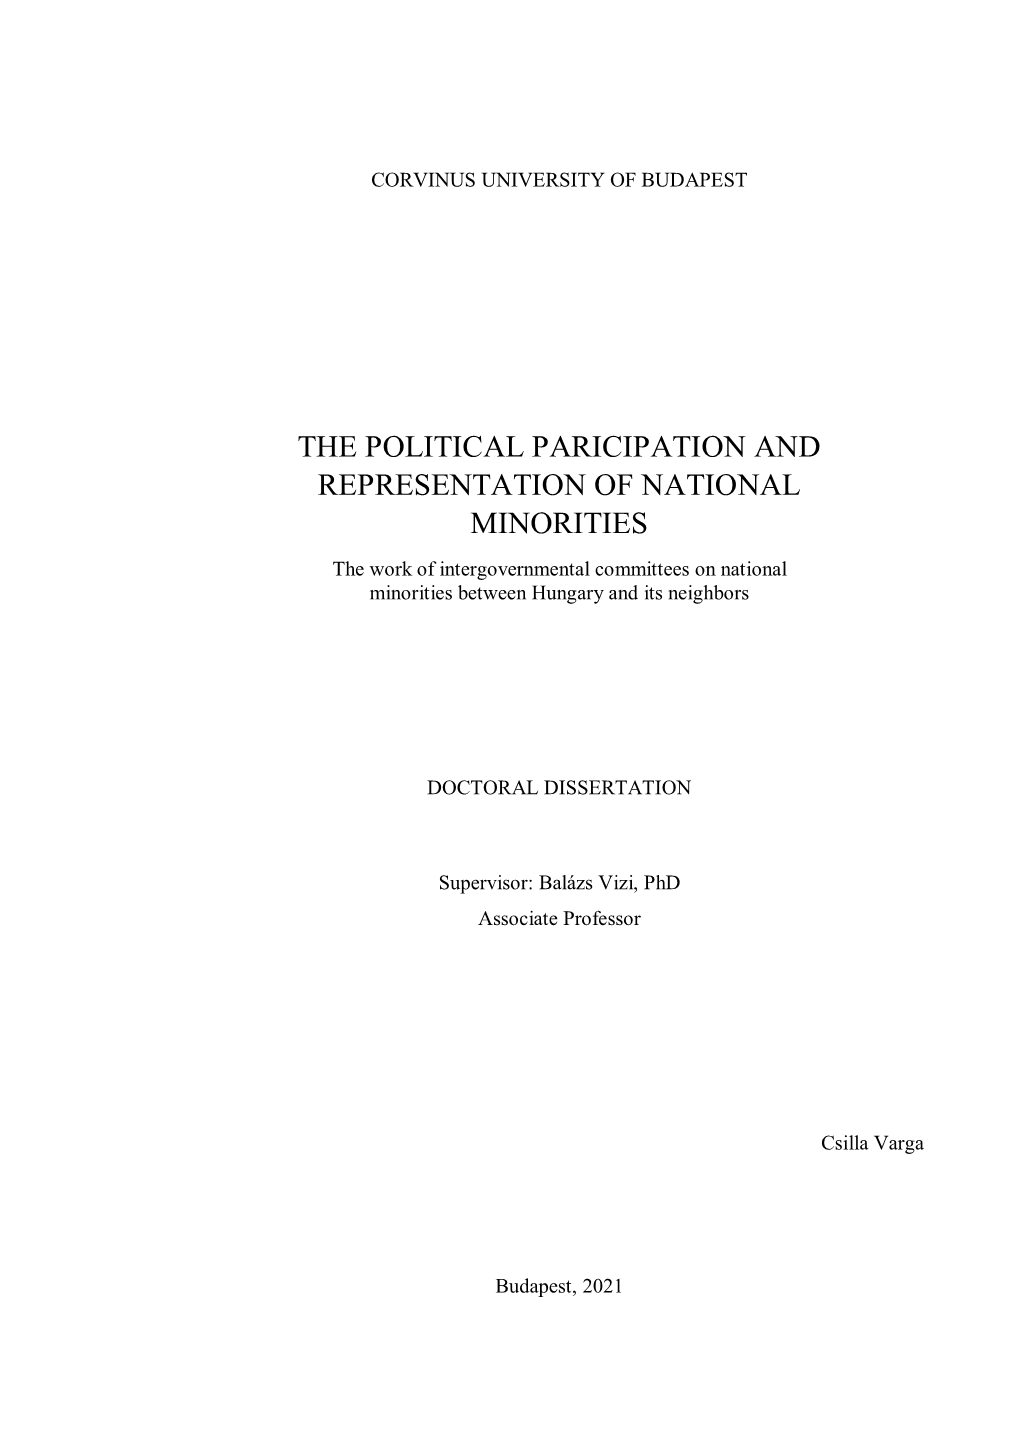 The Political Paricipation and Representation of National